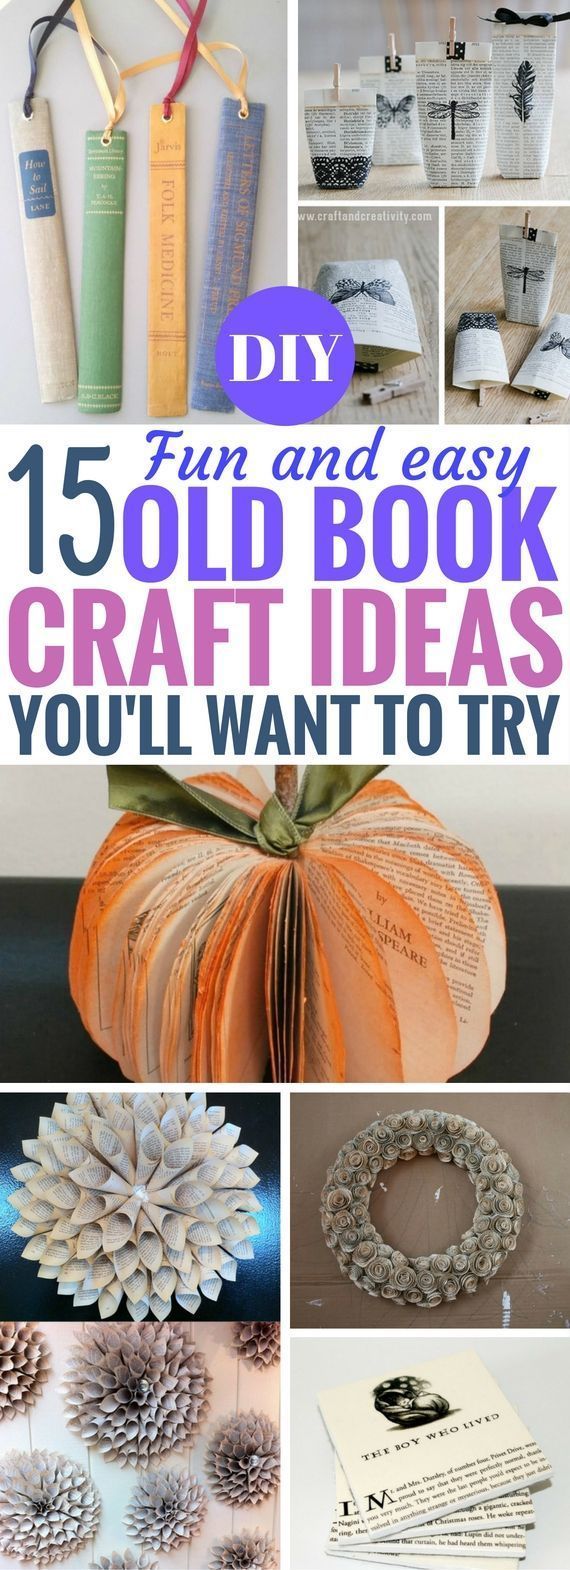 15 DIY Old Book Craft Ideas That Are Beautifully Vintage Looking -   17 diy projects Useful creative ideas